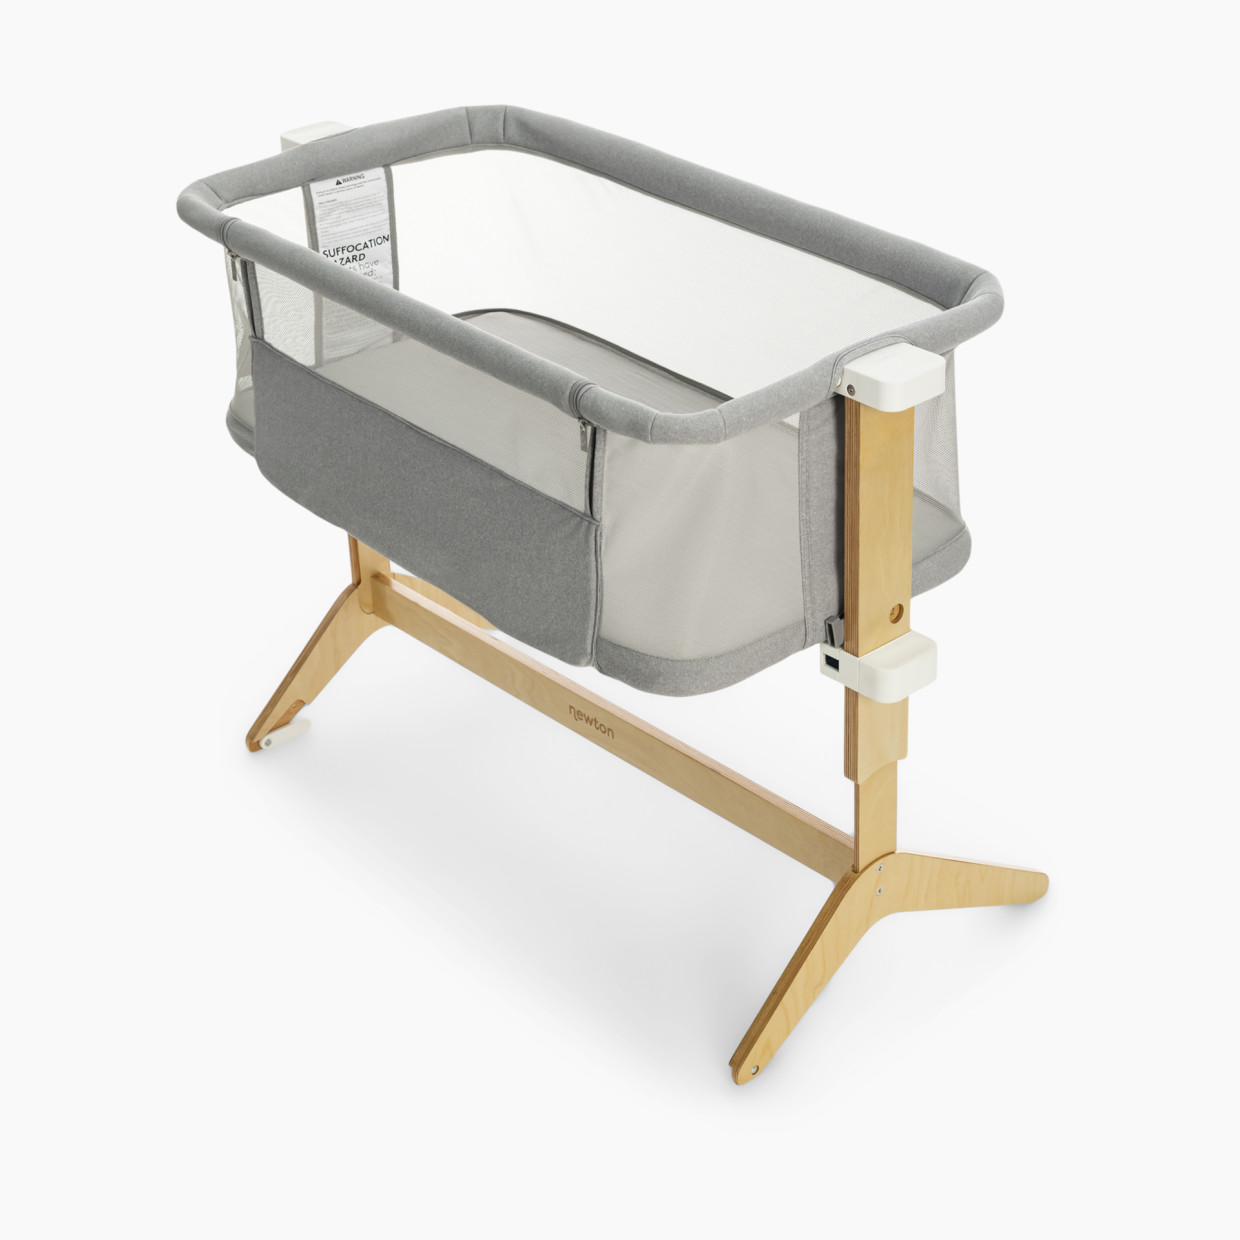 Baby Crib,3 in 1 Bedside Crib Adjustable Portable Bed for Infant,Baby  Bassinet Baby Newborn Must Have Bed,Grey